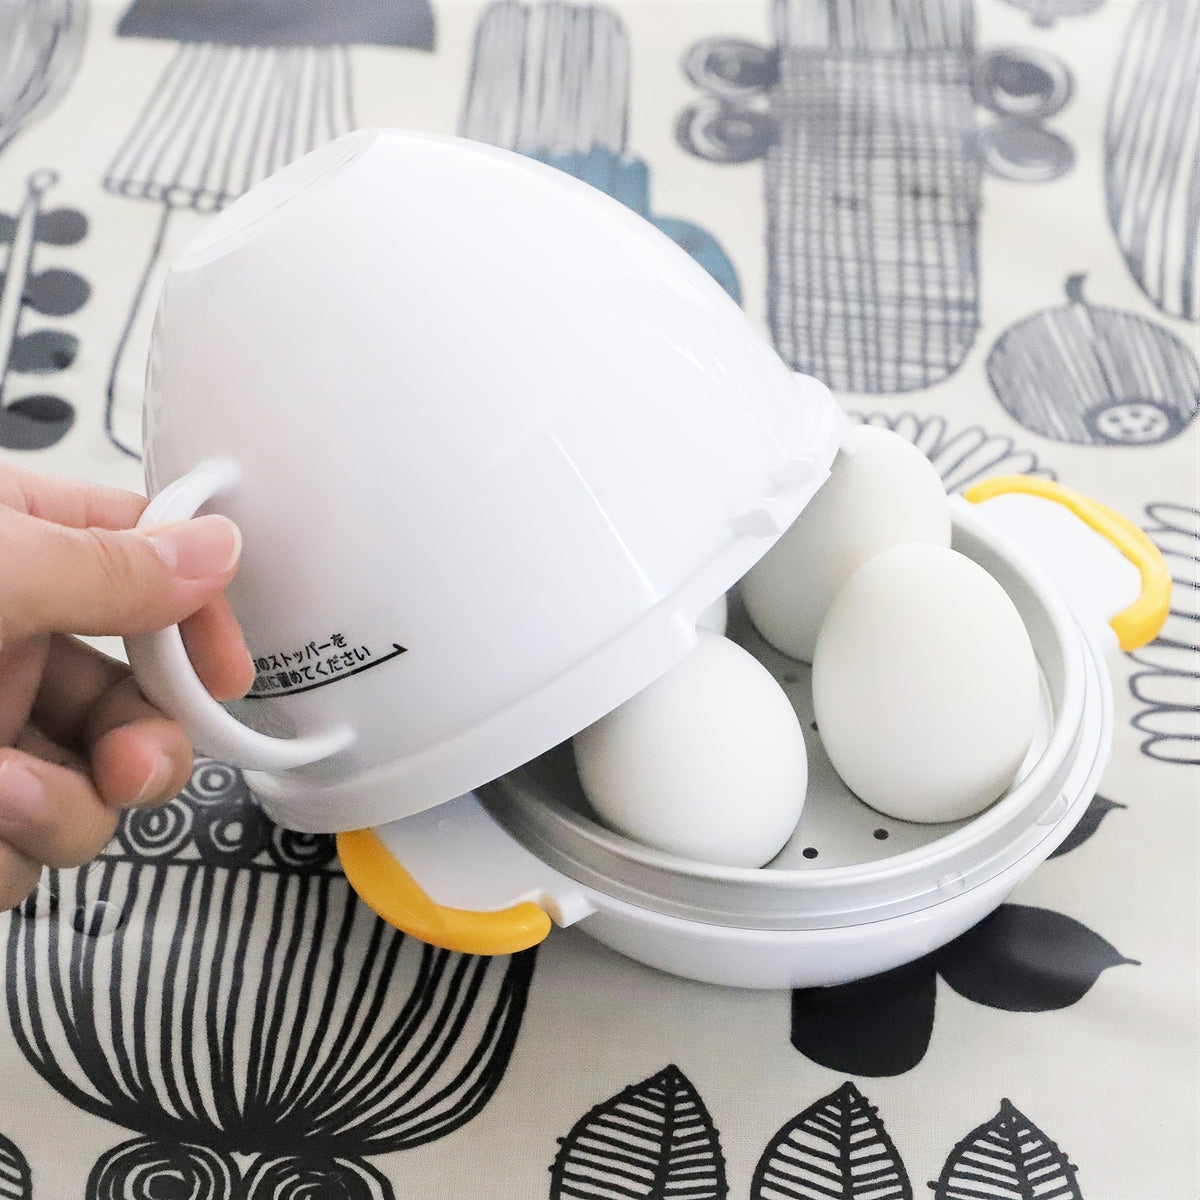 Egg Cooker, Microwave Egg Maker, Boiler & Steamer, 4 Perfectly-Cooked Hard  or Soft Boiled Eggs in Under 9 minutes As Seen On TV, White